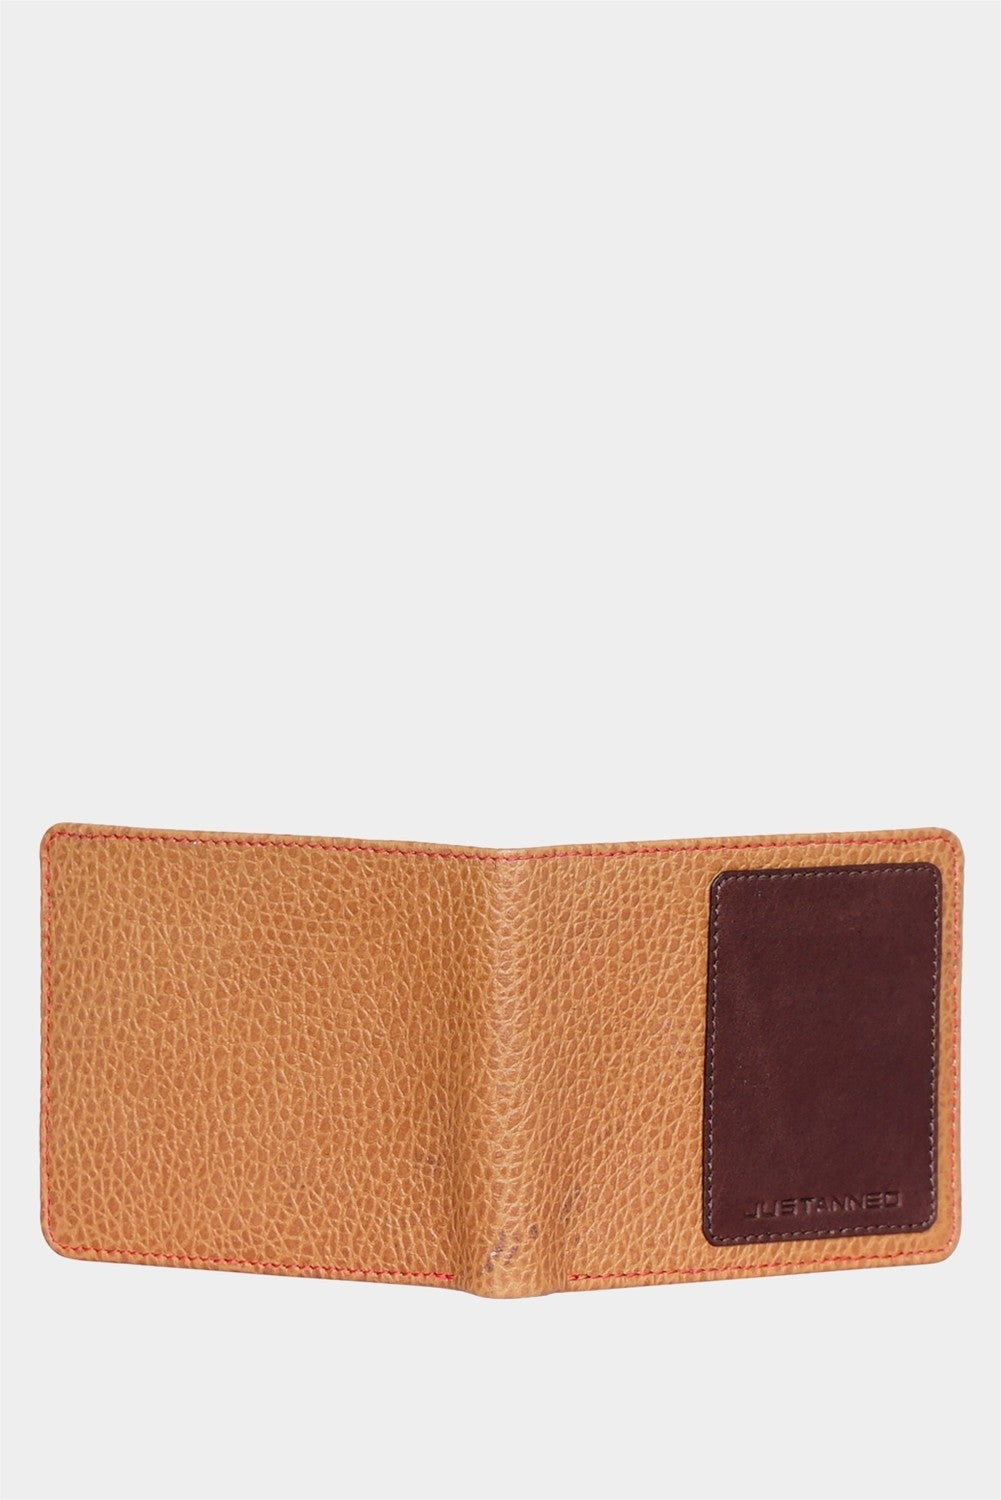 Justanned Tan Men Wallet With Brown Patch